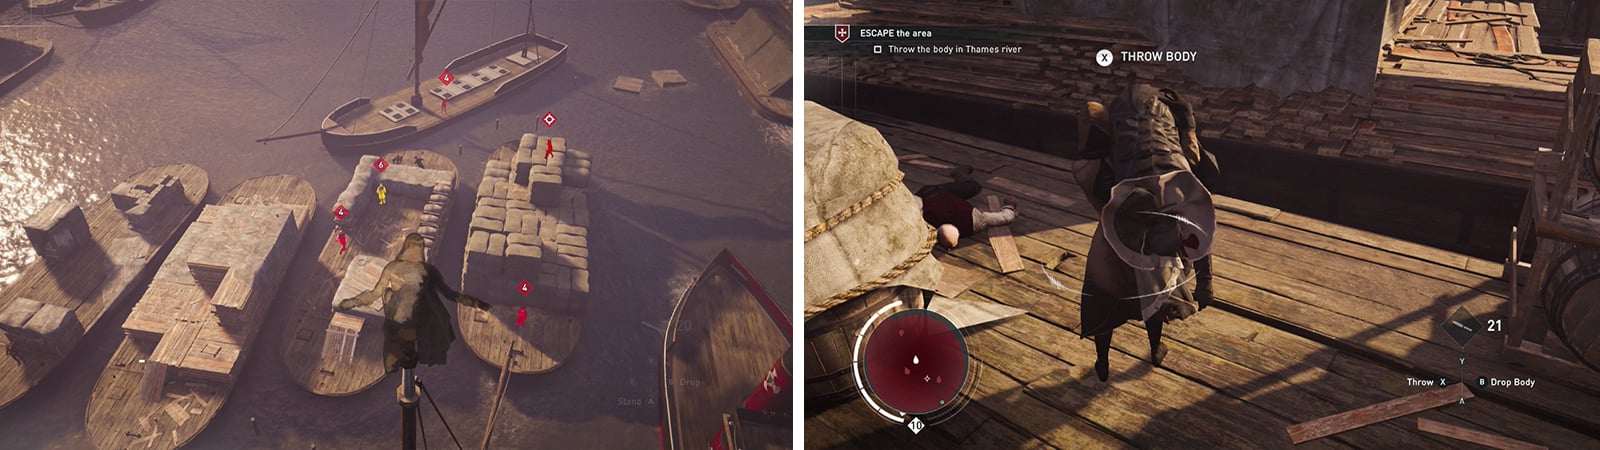 The target can be found on a barge (left). Once you have killed him throw his body in the river for the optional objective (right).